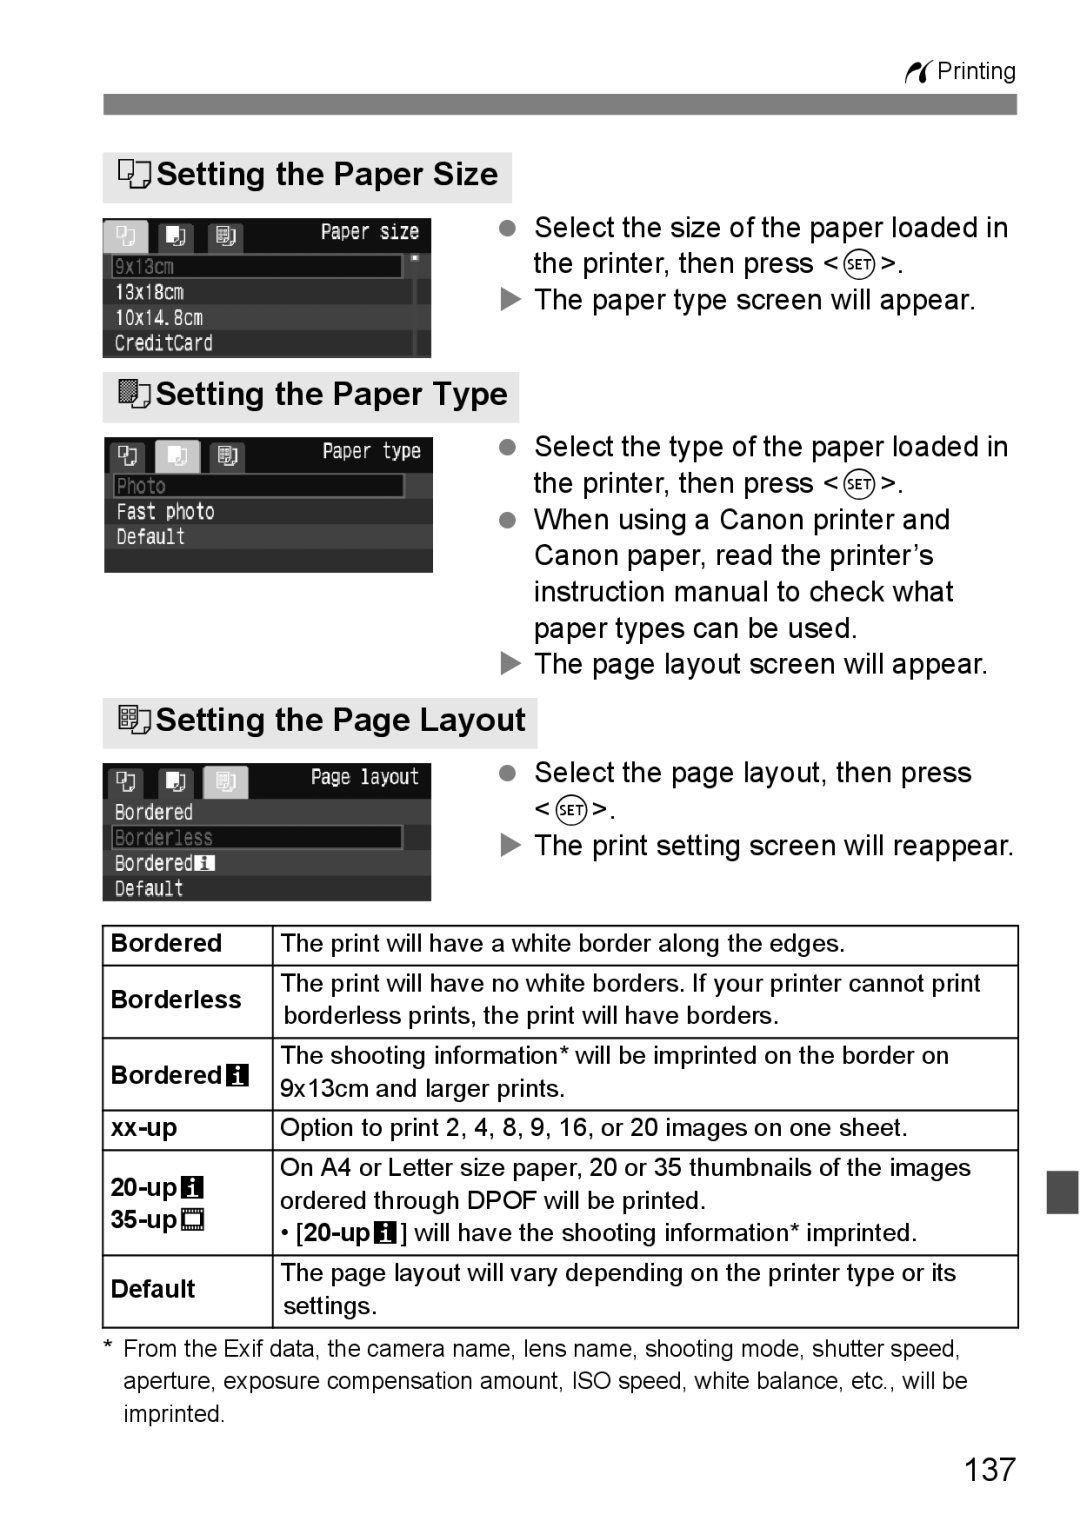 Canon EOS 450D instruction manual QSetting the Paper Size, YSetting the Paper Type, USetting the Page Layout, 137 